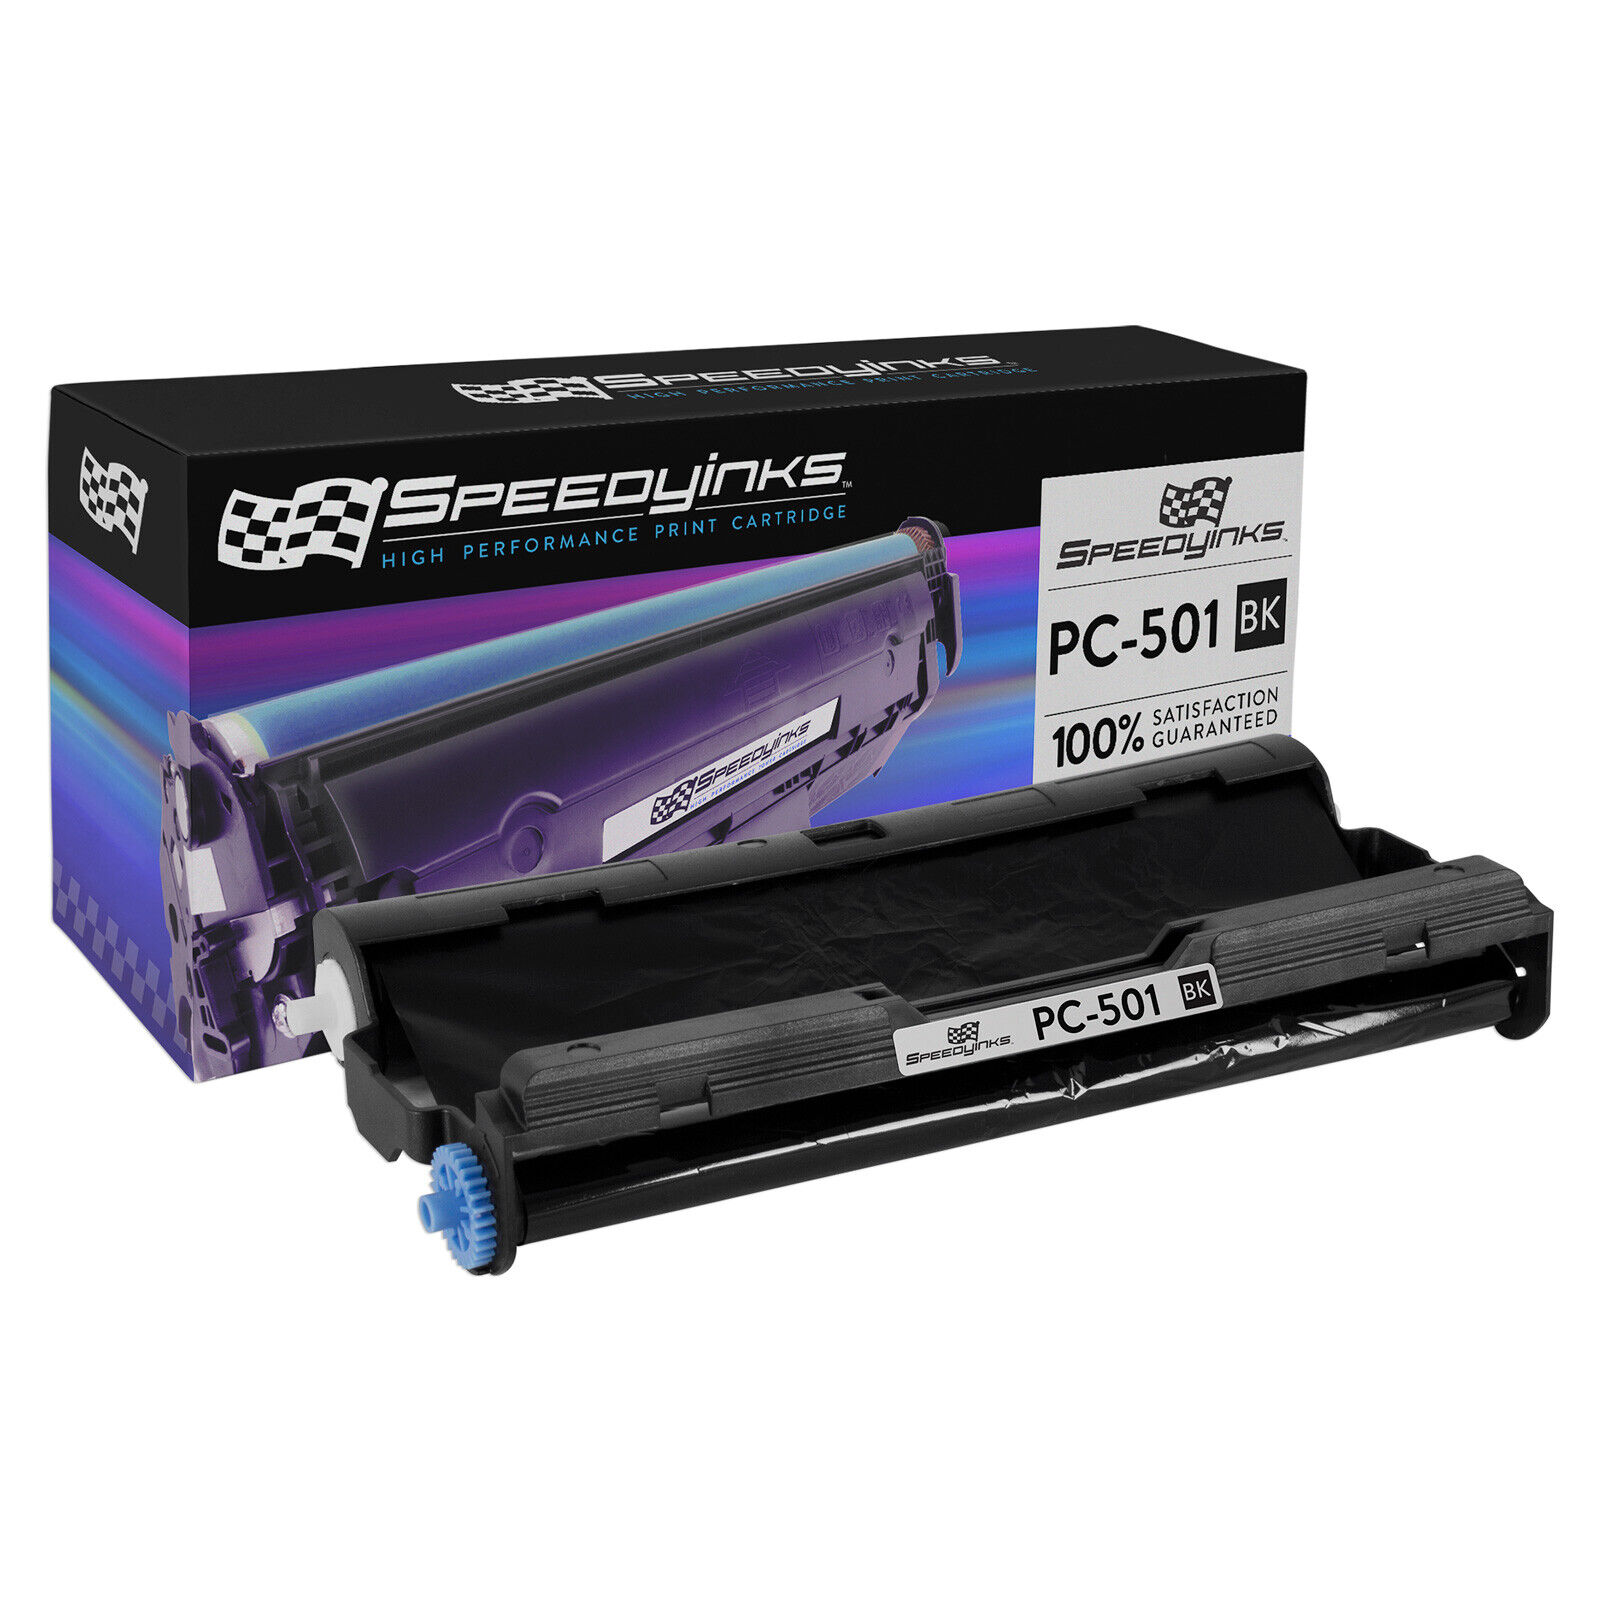 Compatible PC501 Fax Cartridge with Roll for Brother FAX 575, 878 Printers